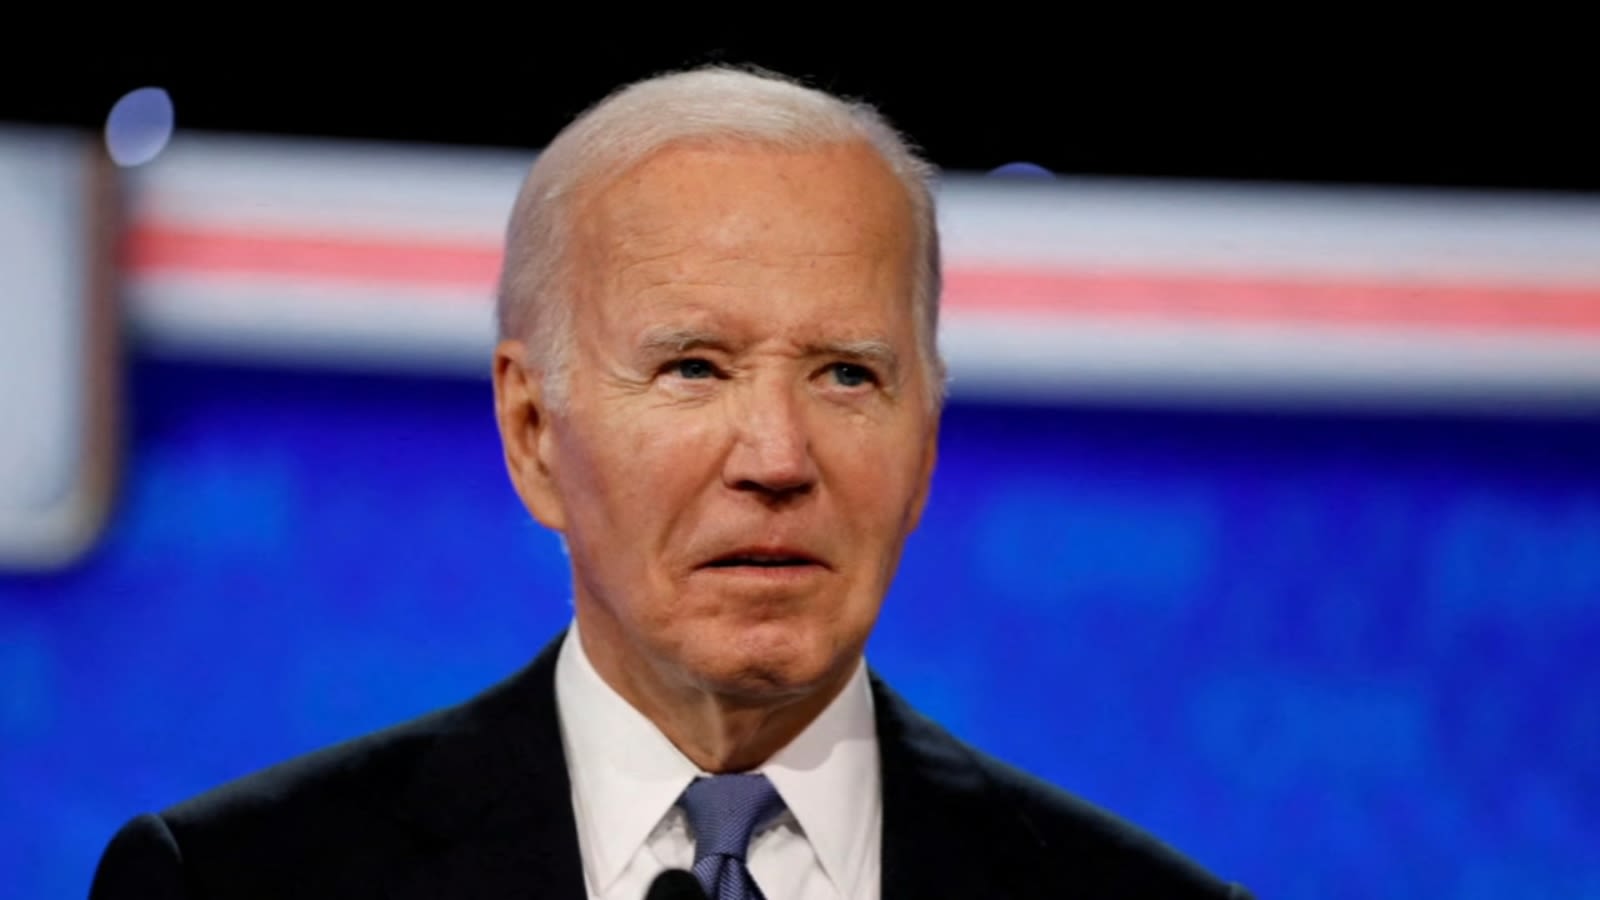 If Biden drops out, who could replace him? A look at possible candidates